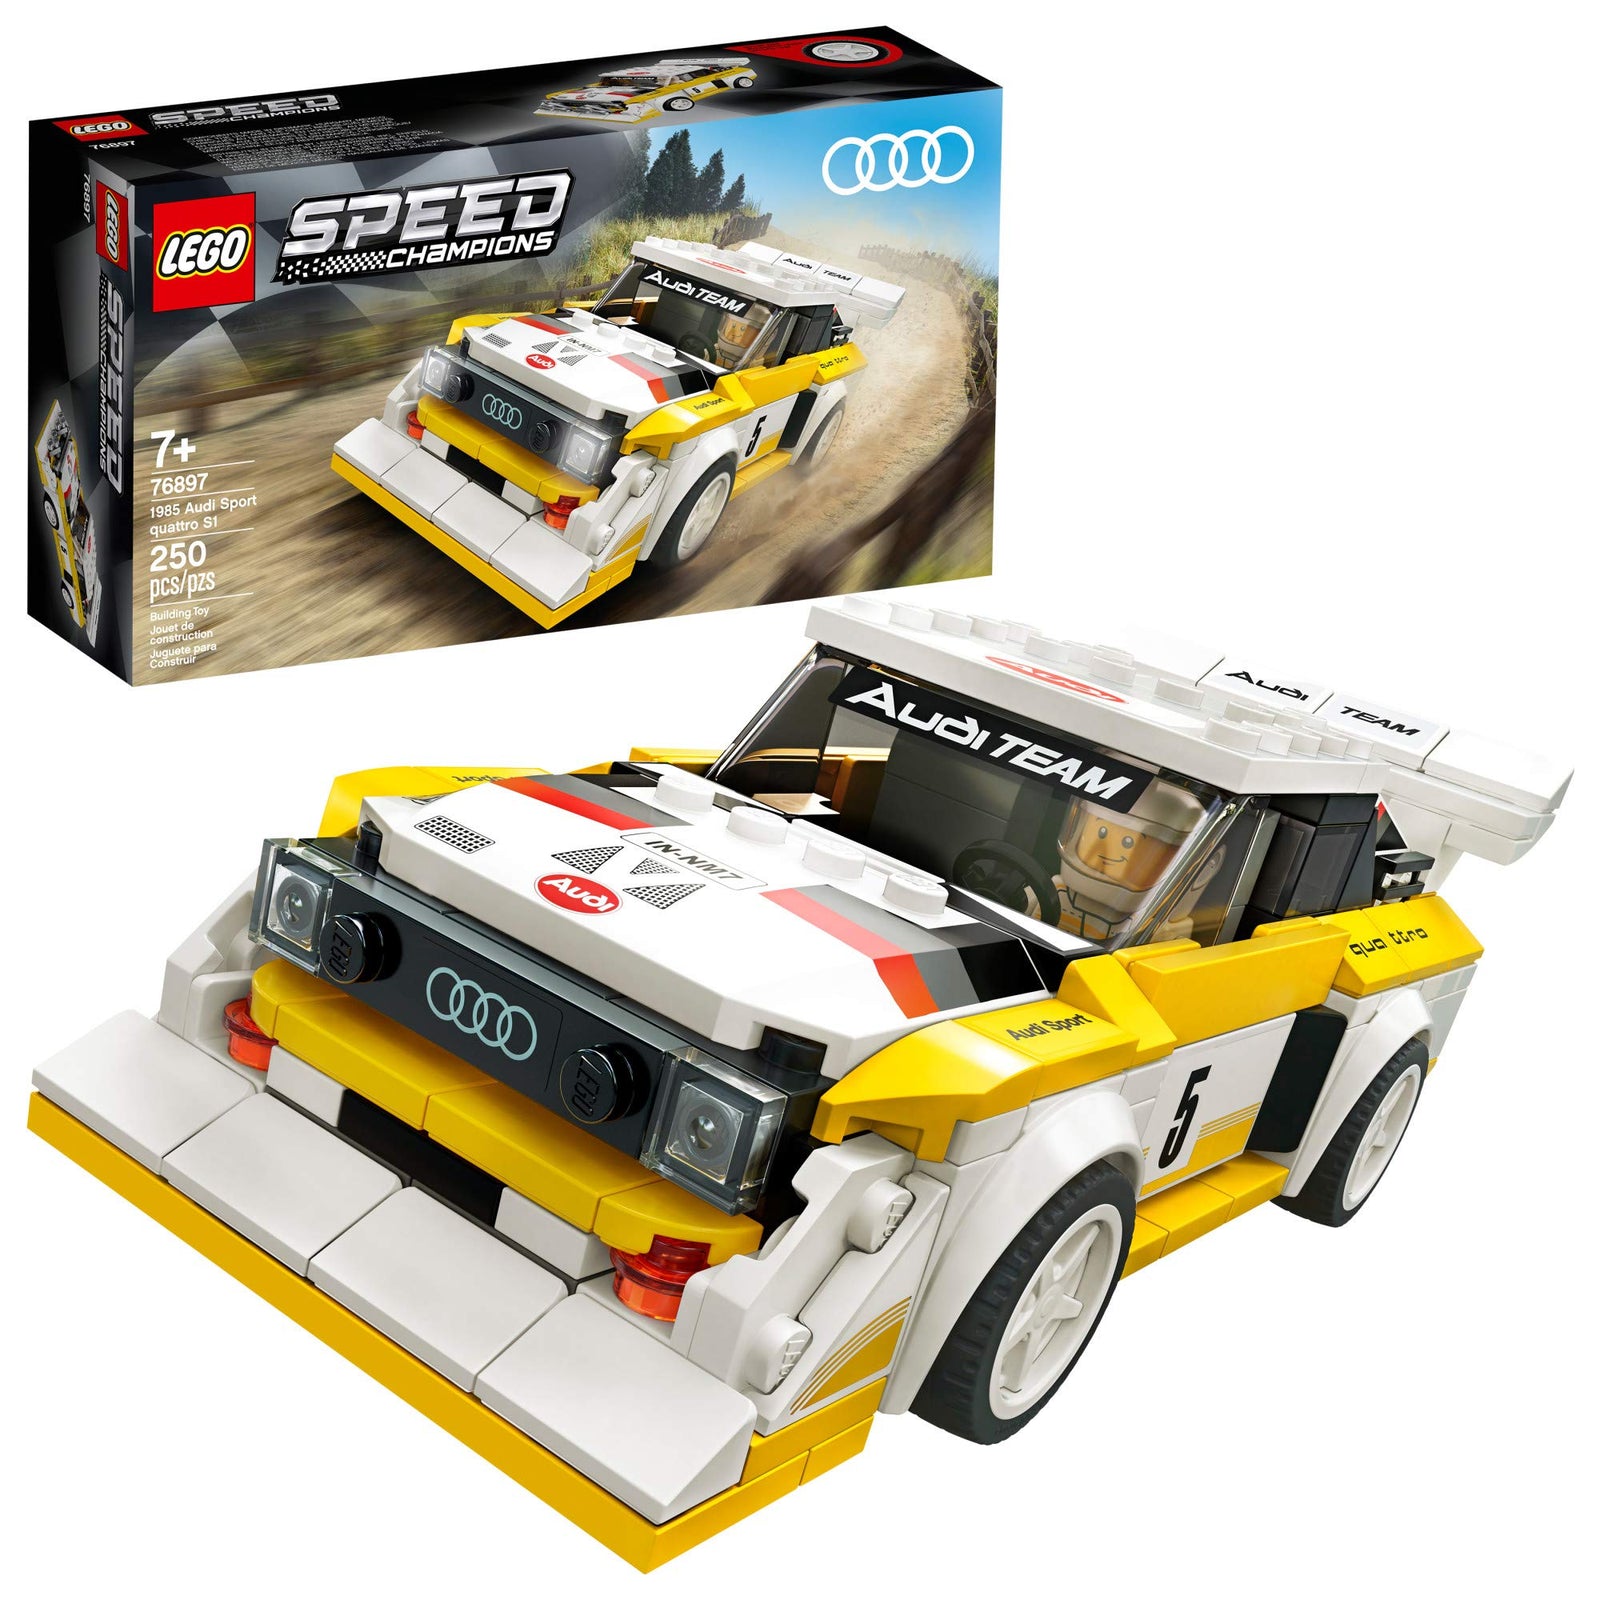 LEGO Speed Champions 1985 Audi Sport Quattro S1 76897 Toy Cars for Kids Building Kit Featuring Driver Minifigure (250 Pieces)